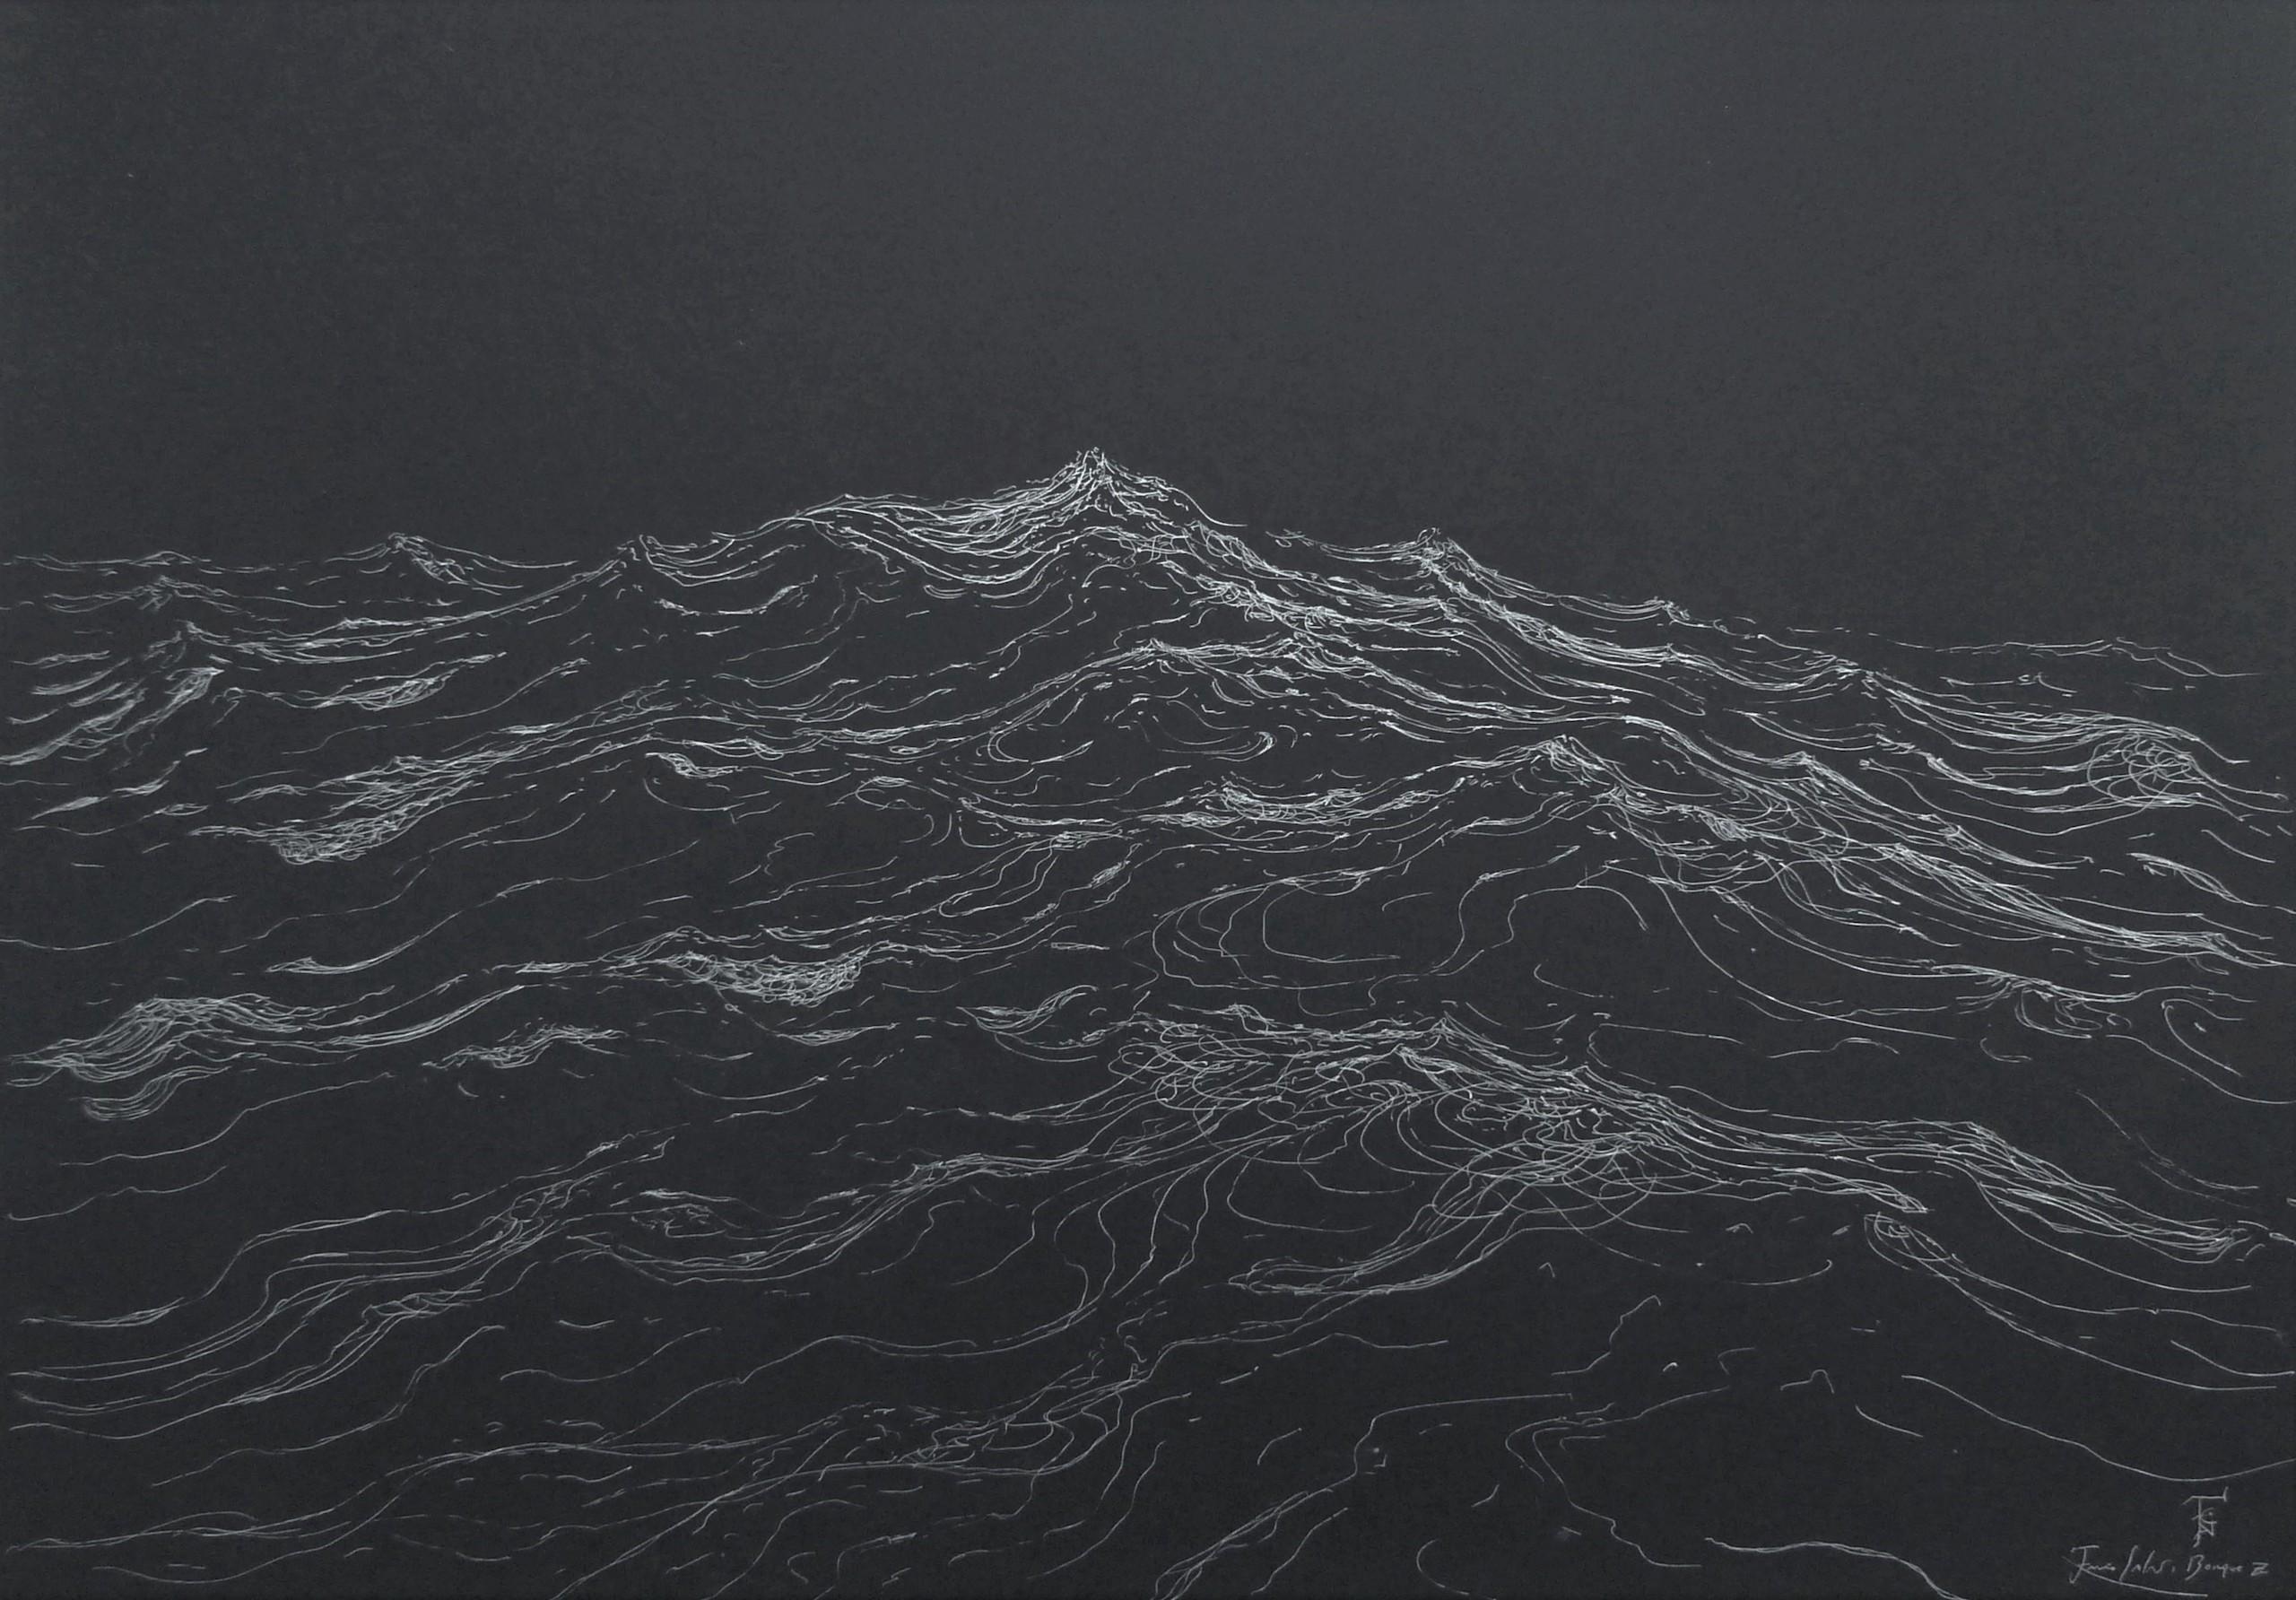 Extreme currents is a unique silver ink on Canson paper painting by contemporary artist Franco Salas Borquez, dimensions are 50 × 70 cm (19.7 x 27.6 in). It is sold framed under an anti-reflective glass and the framed dimensions are 63 x 83 cm (24.9